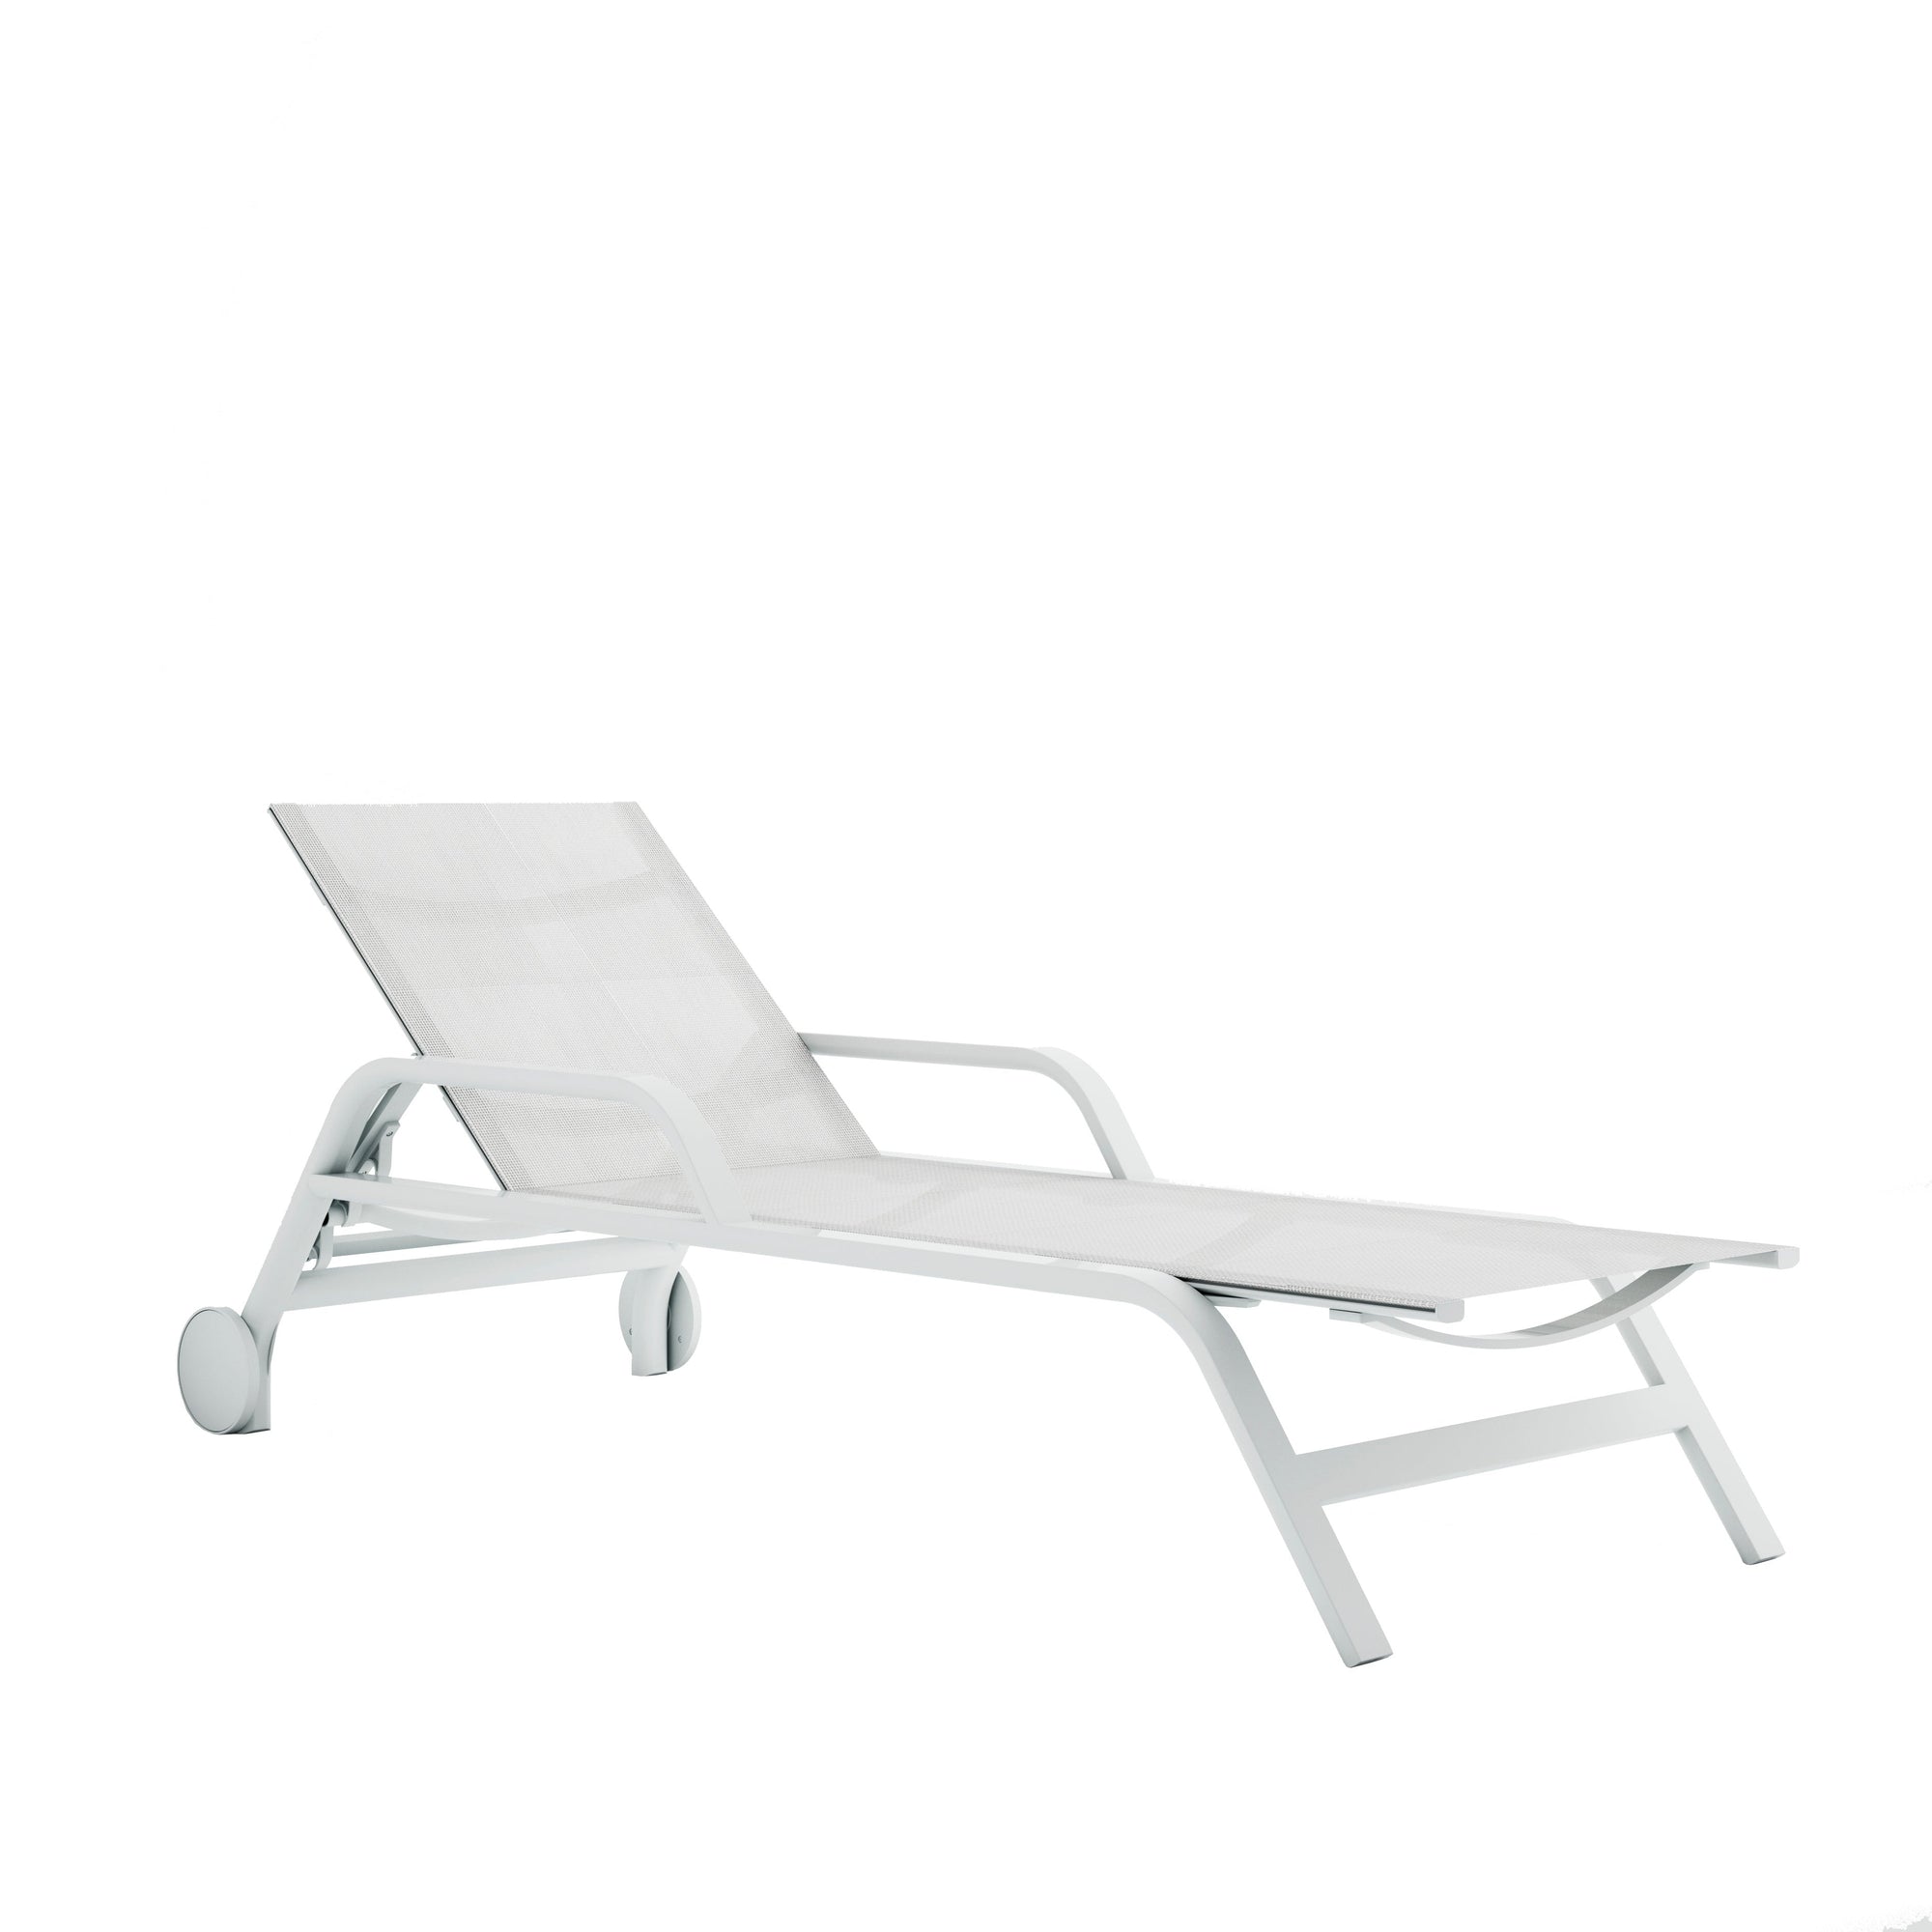 Gandia Blasco Stack sun lounger stackable with armrests and wheels